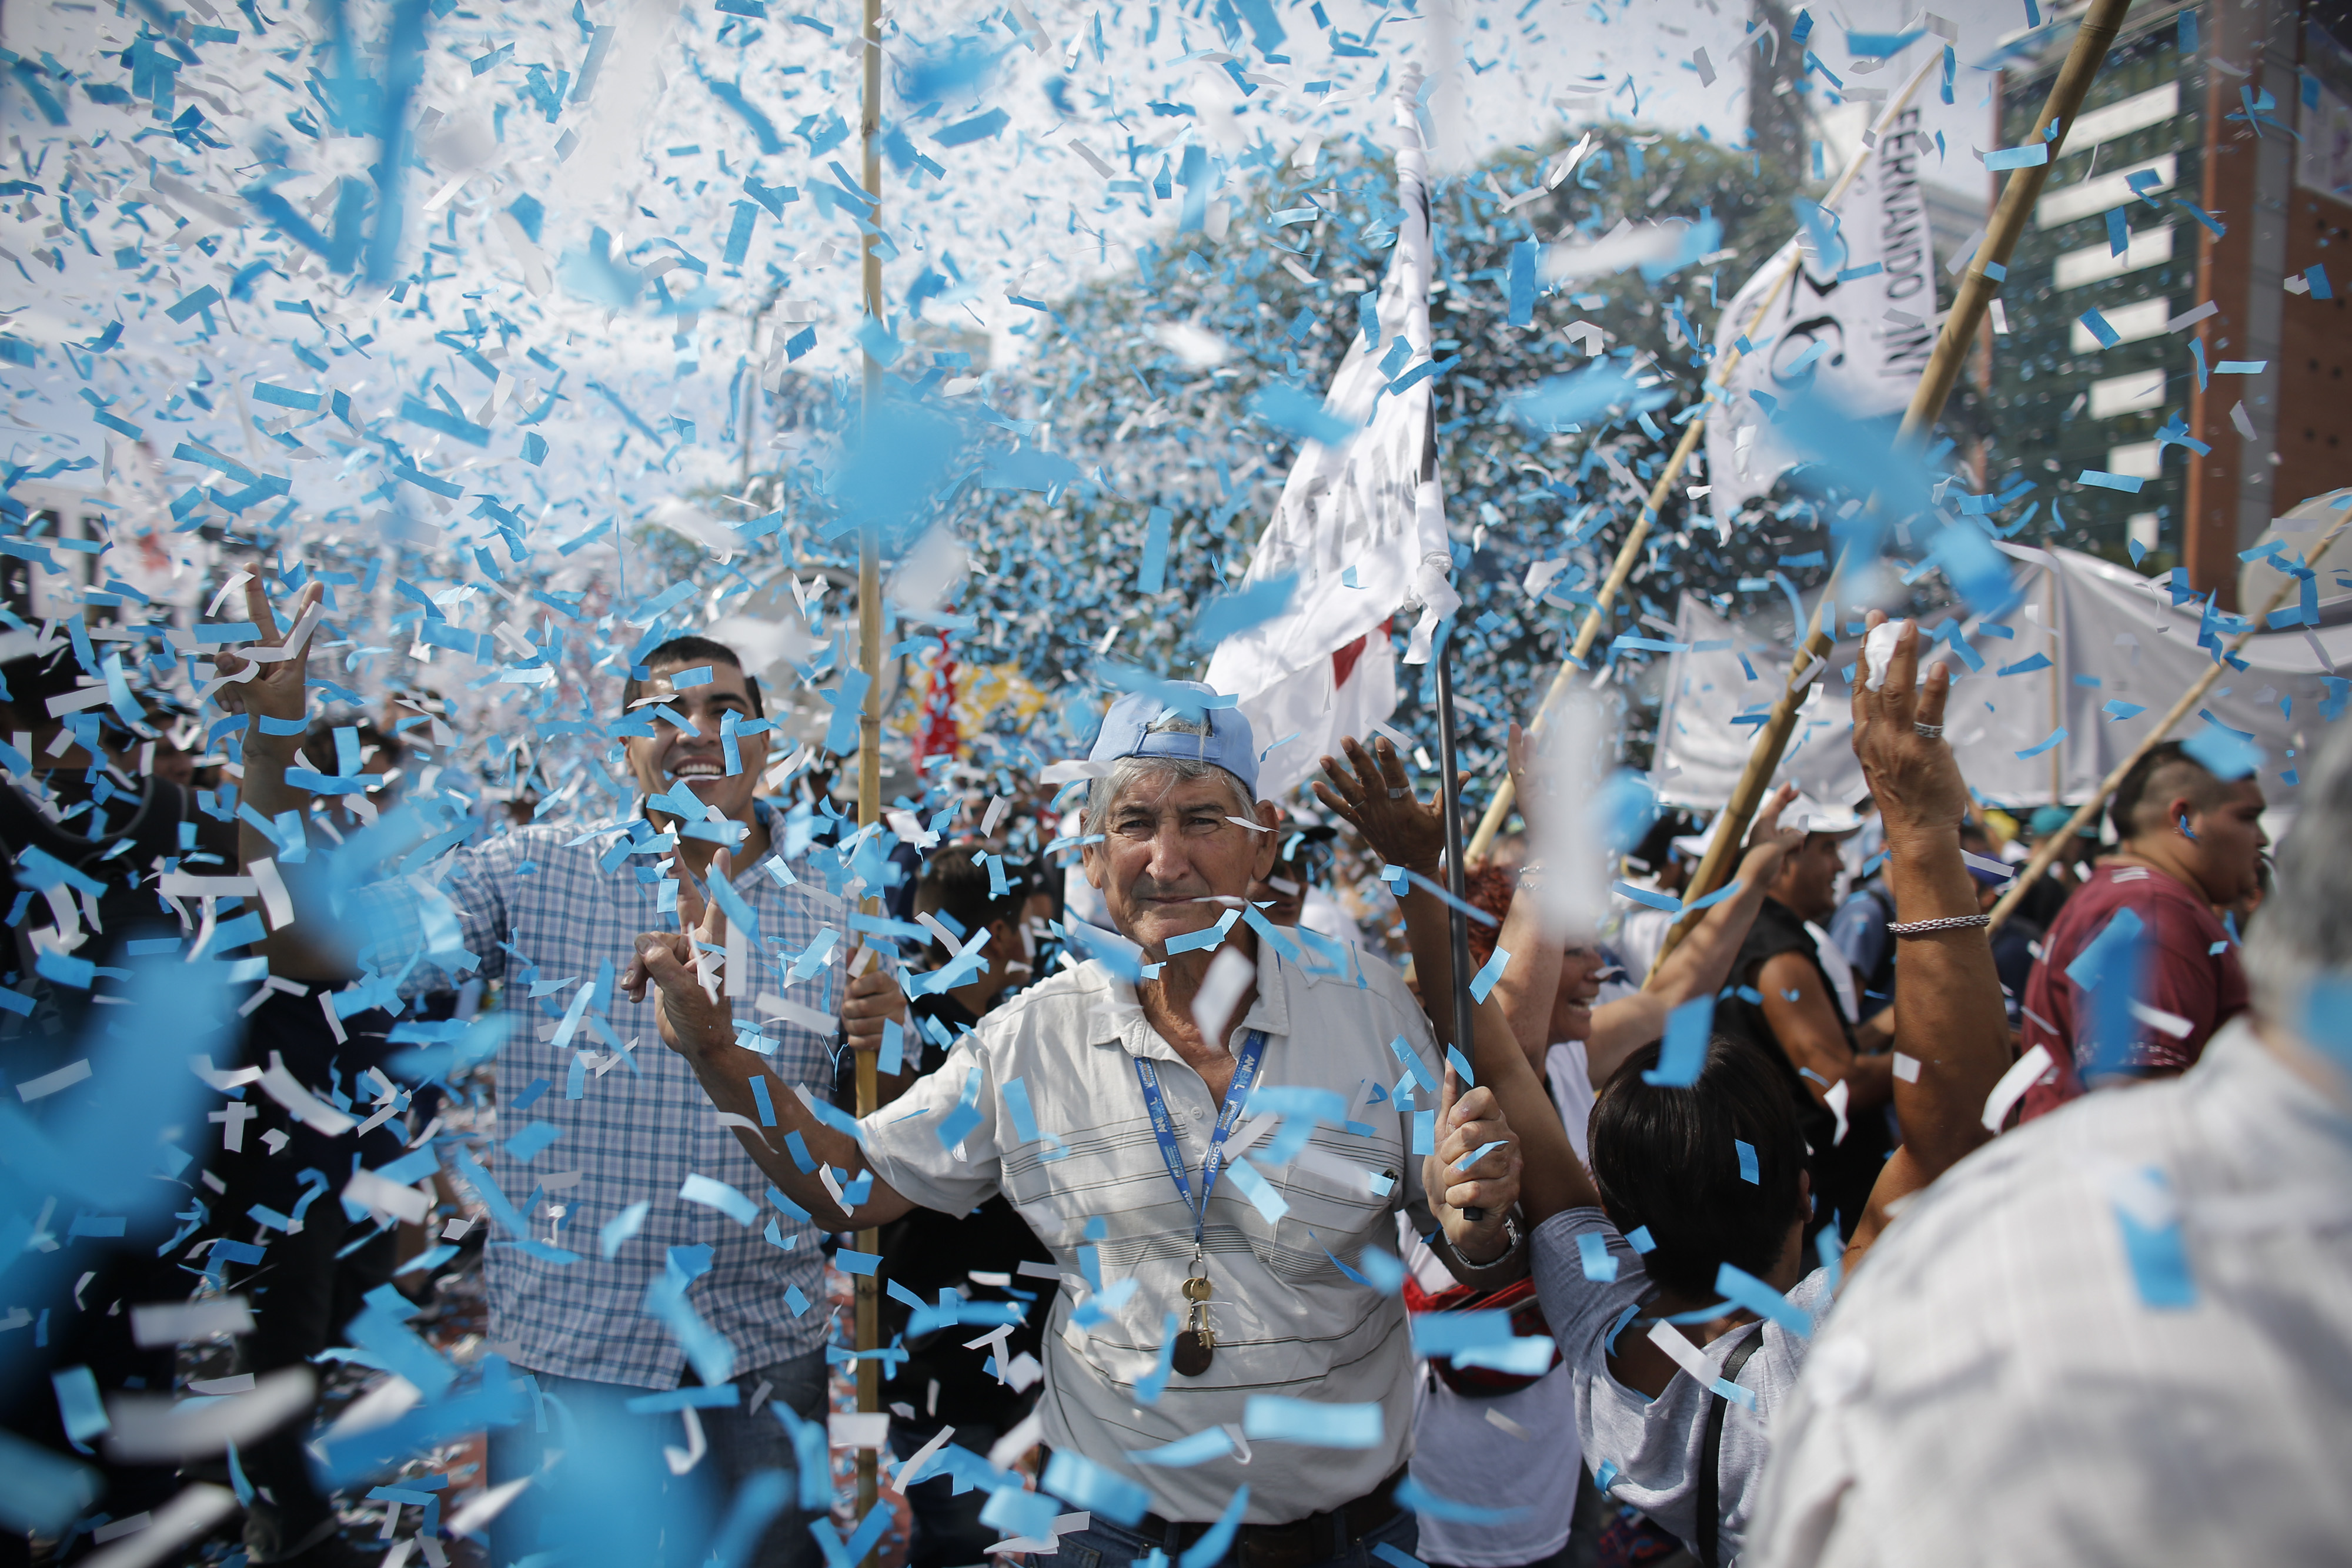 Confetti representing colors of the Argentine flag rain on demonstrators during a labor march in Buenos Aires, Argentina, Tuesday, March 7, 2017. Argentina's most powerful unions brought tens of thousands of people into the capital's streets to protest government job cuts, the lifting of restrictions on imports and other policies of President Mauricio Macri. (AP Photo/Victor R. Caivano)